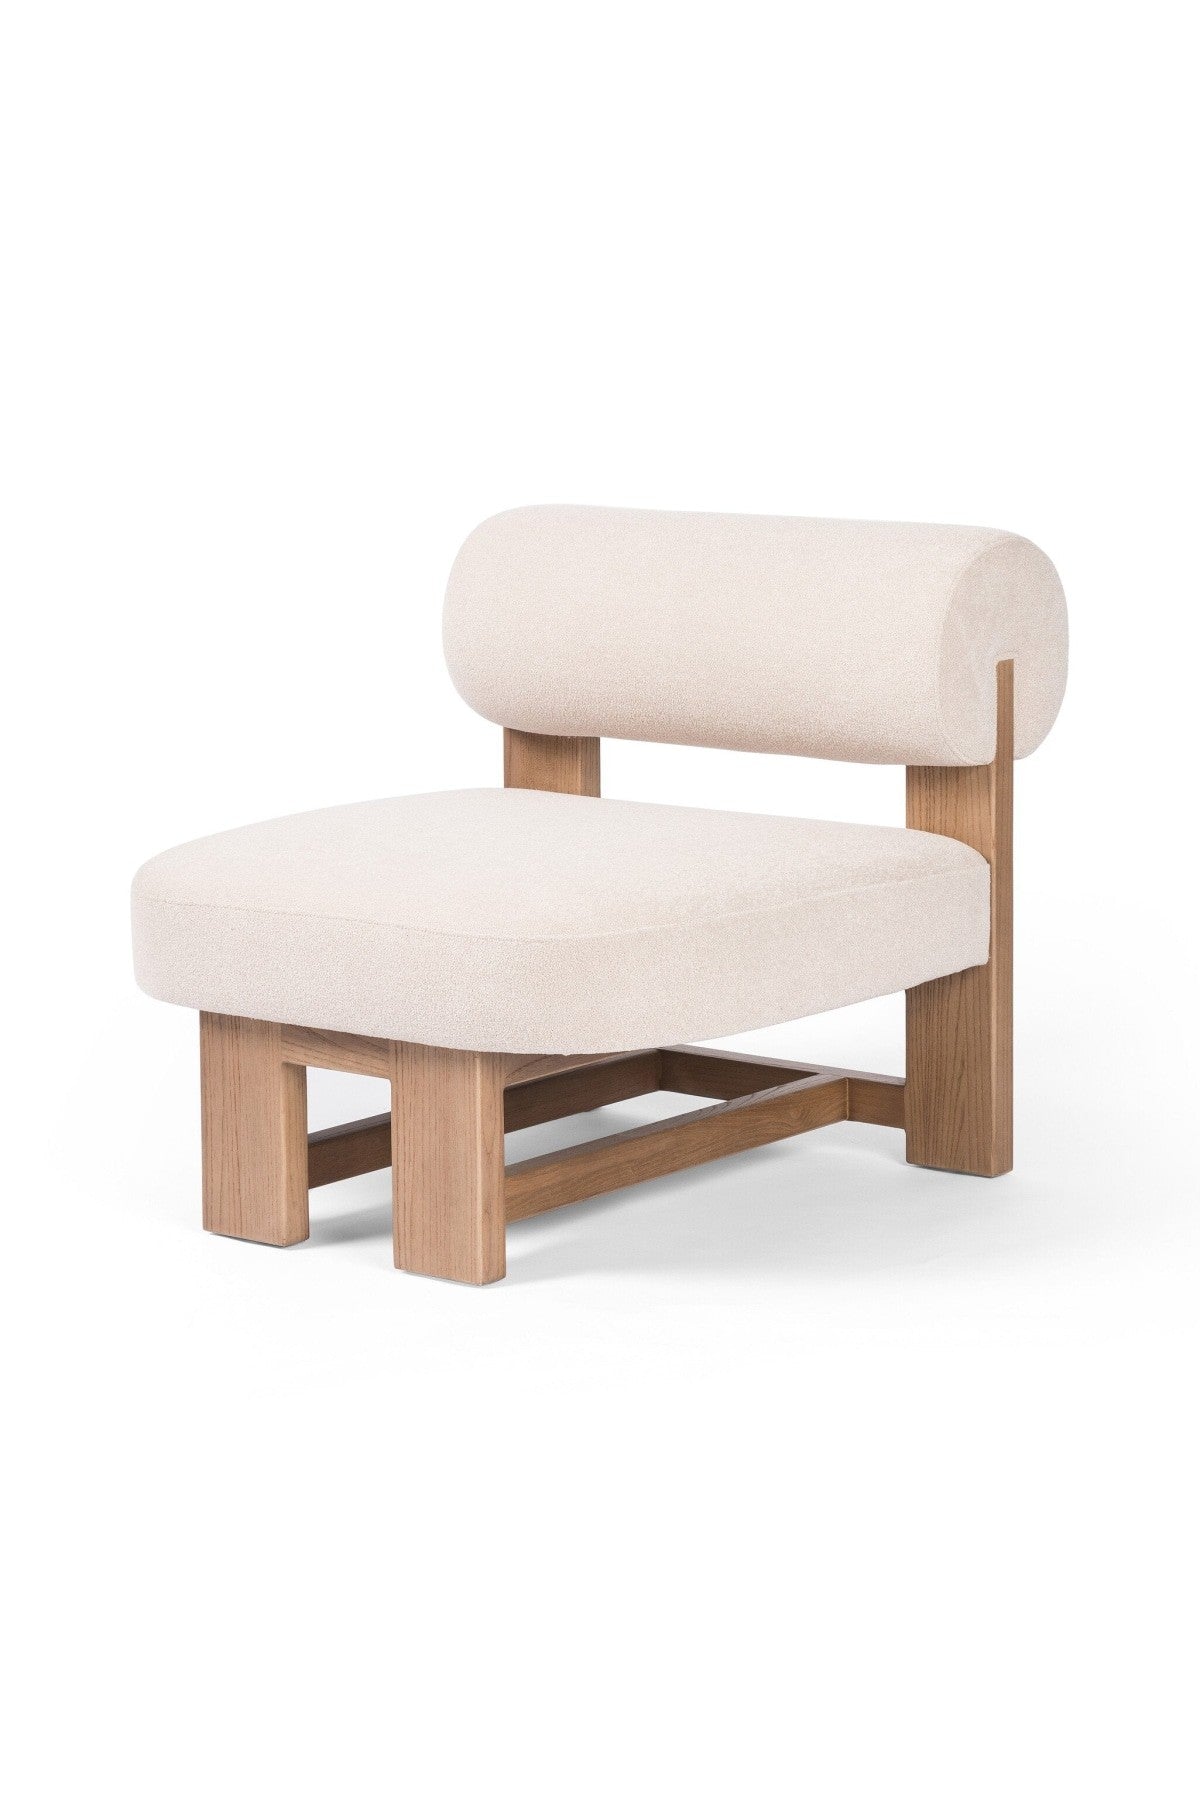 Maia Chair - 2 Colors